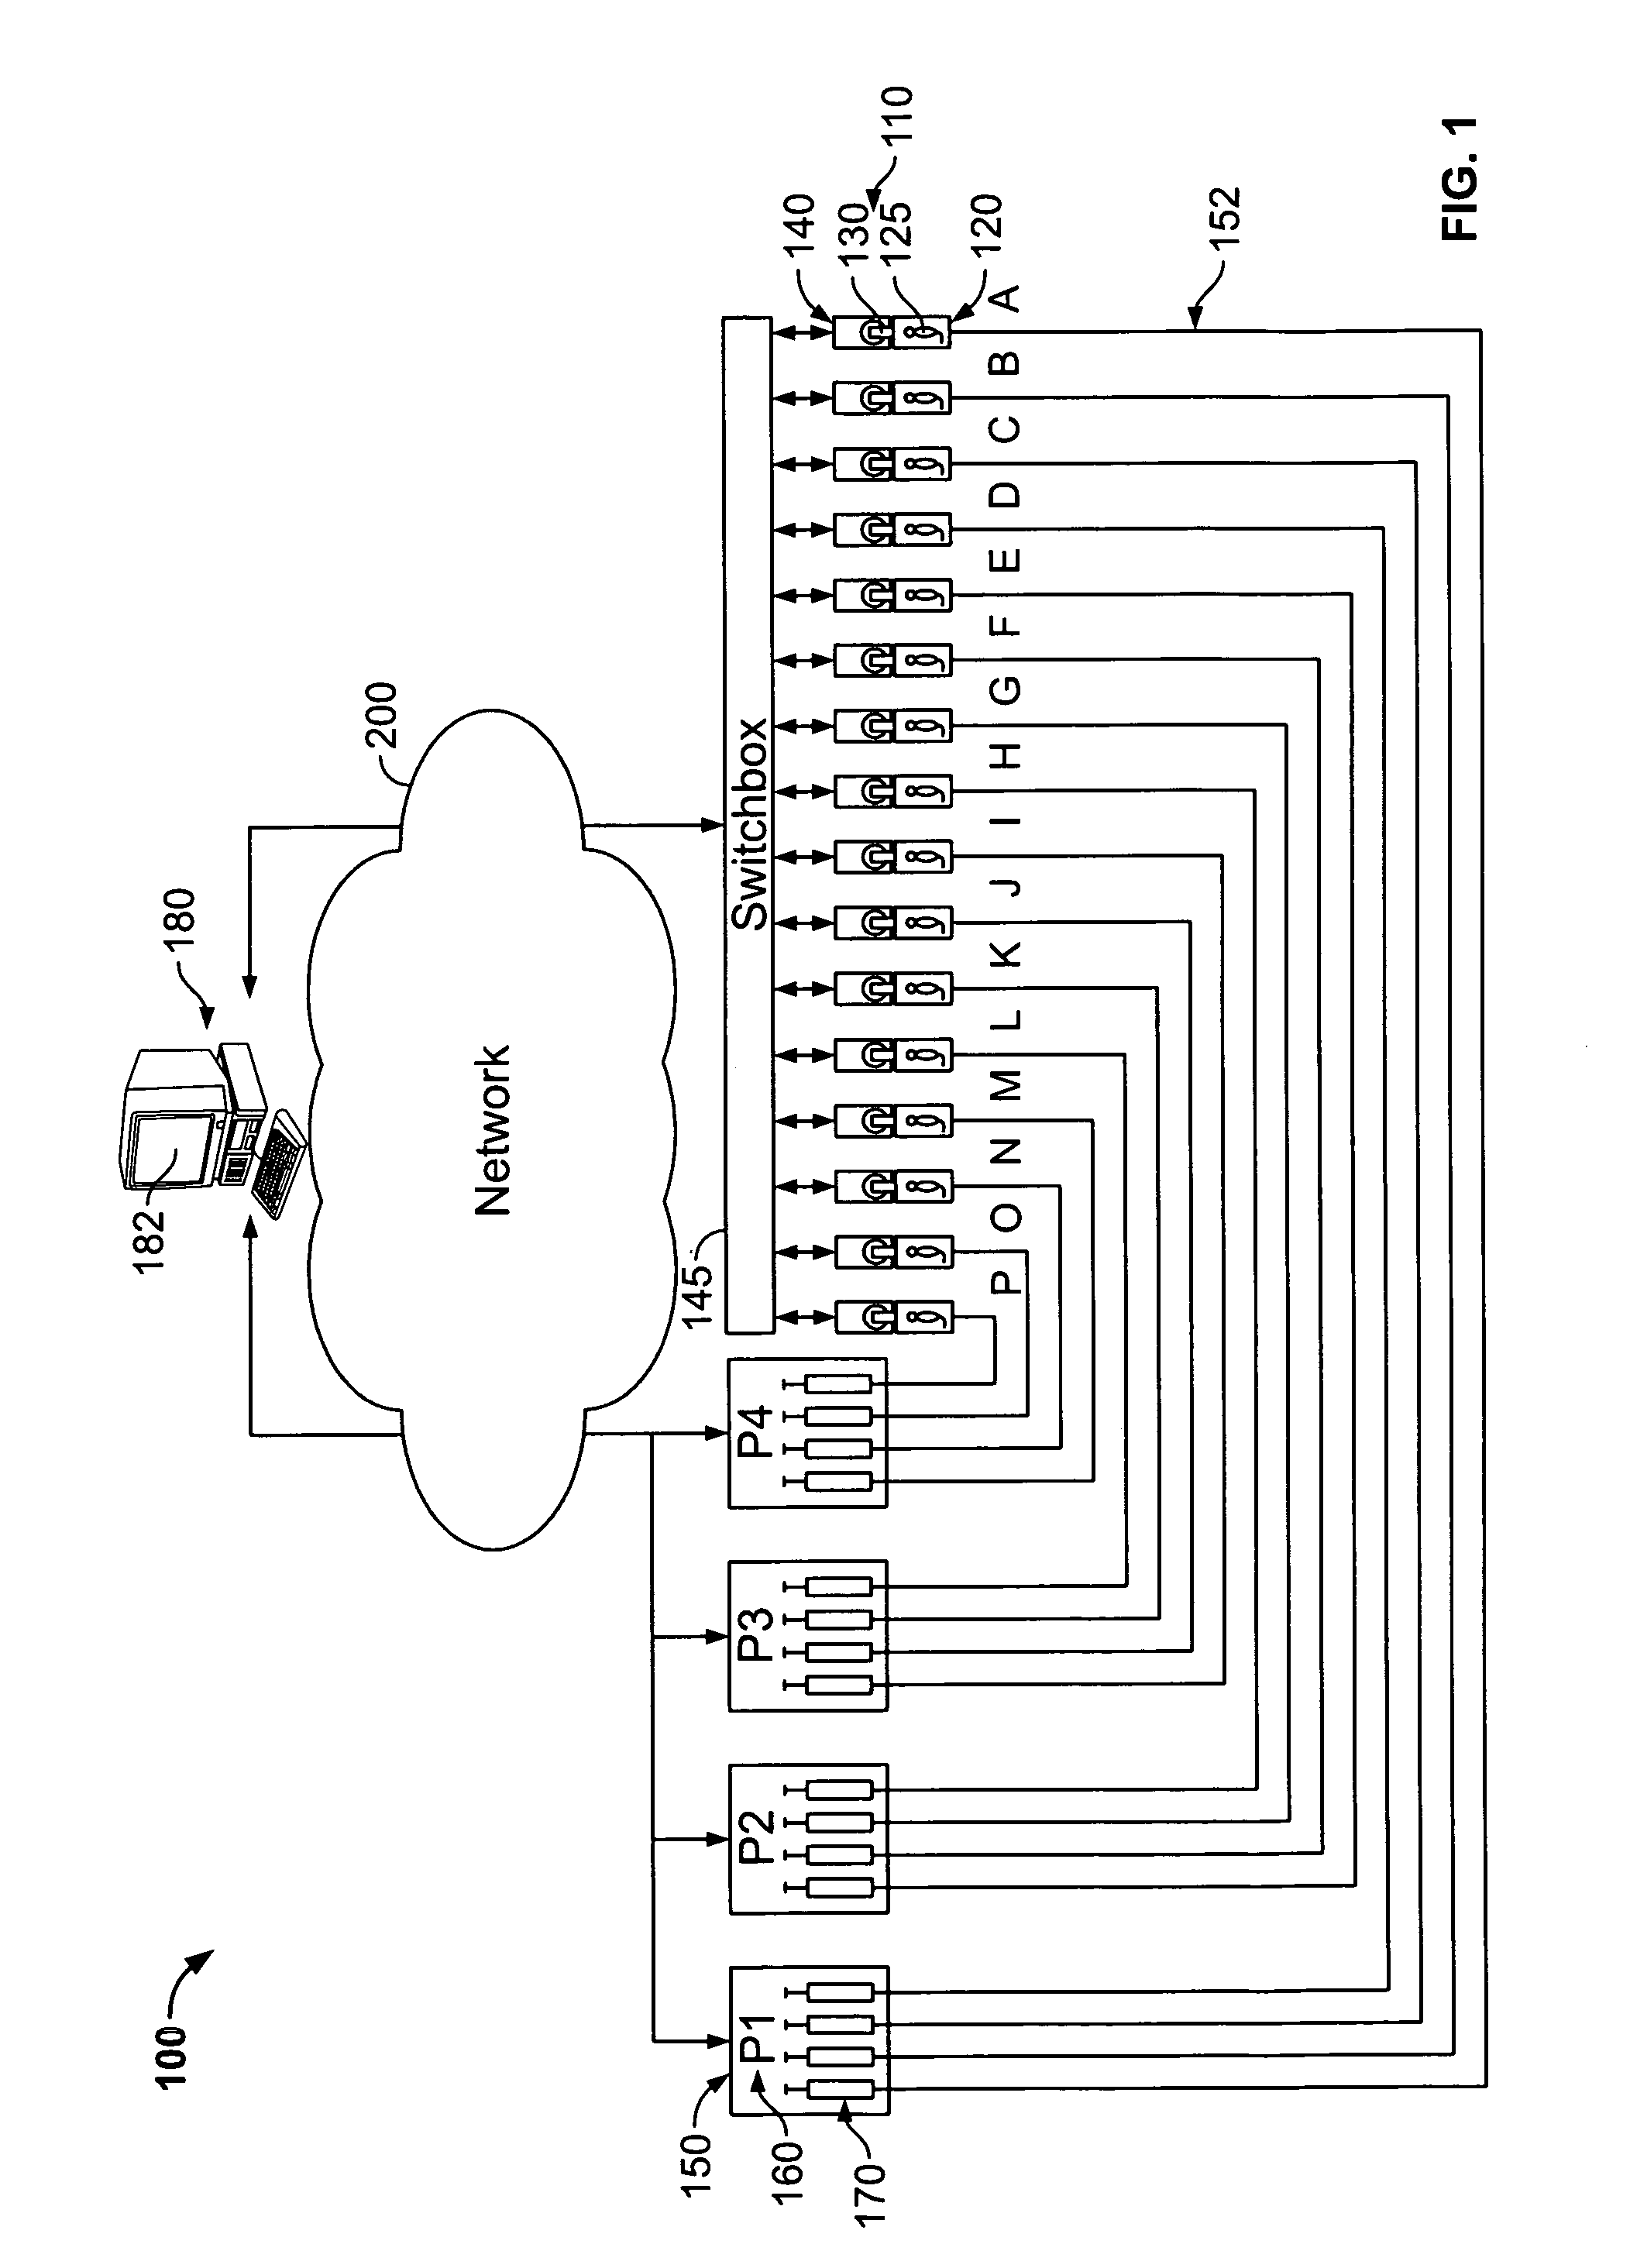 System and methods for evaluating efficacy of appetite-affecting drugs